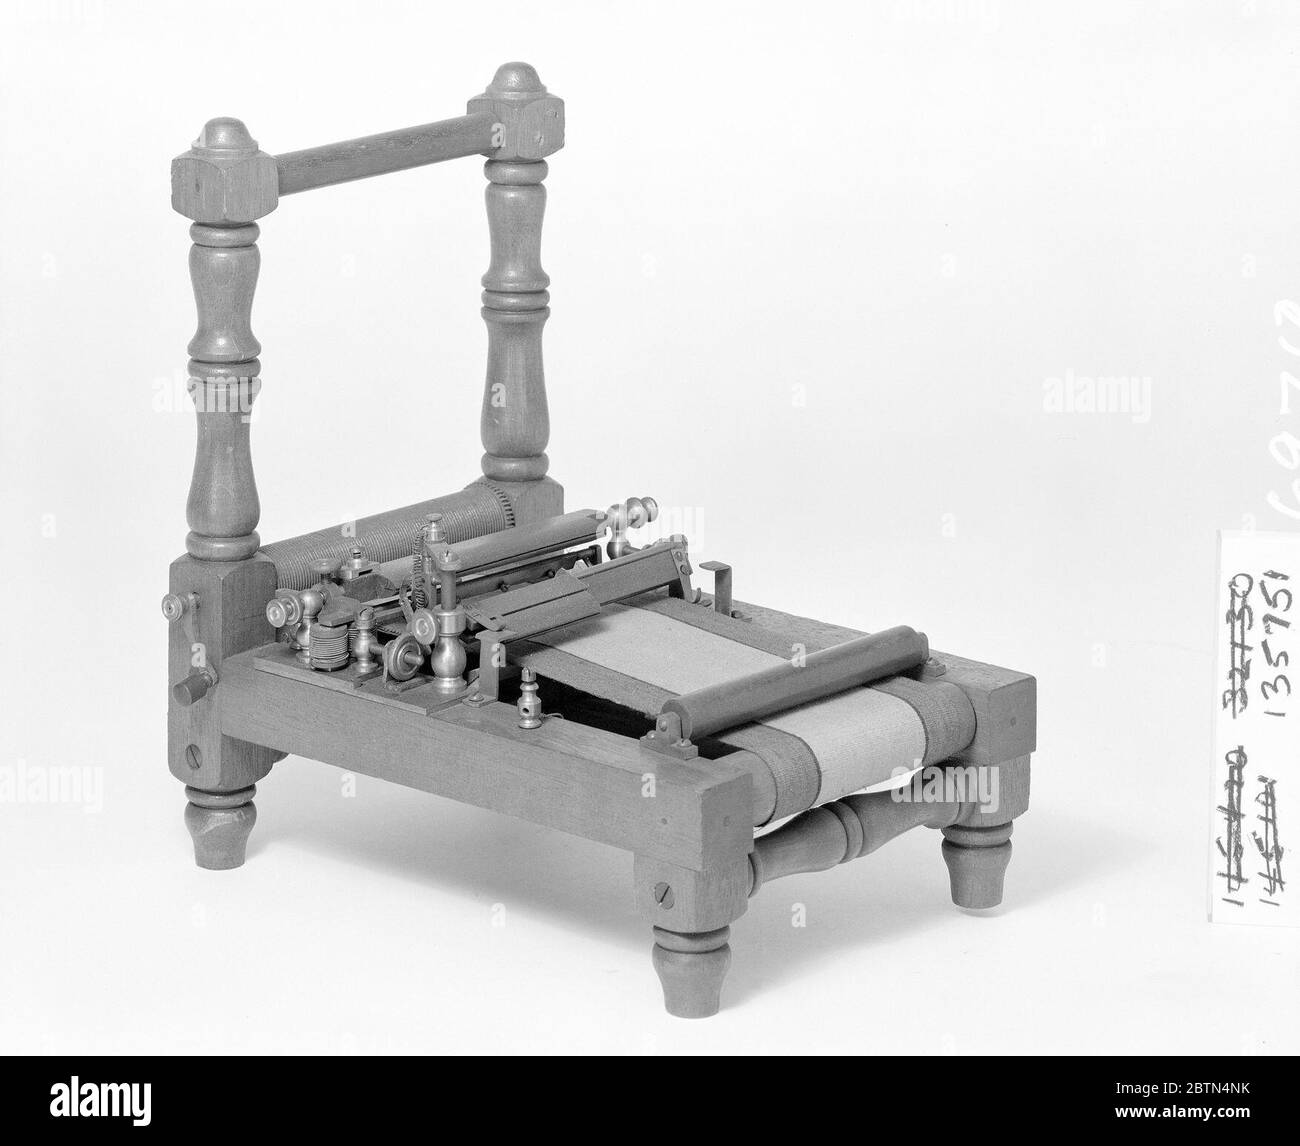 Patent Model for a Paperruling Machine. This patent model demonstrates an invention for a paper-ruling machine which was granted patent number 135751. The ruling pens on the machine were lowered and lifted by an electro-magnetic apparatus, a 'quick and lively but soft and easy' action. Stock Photo